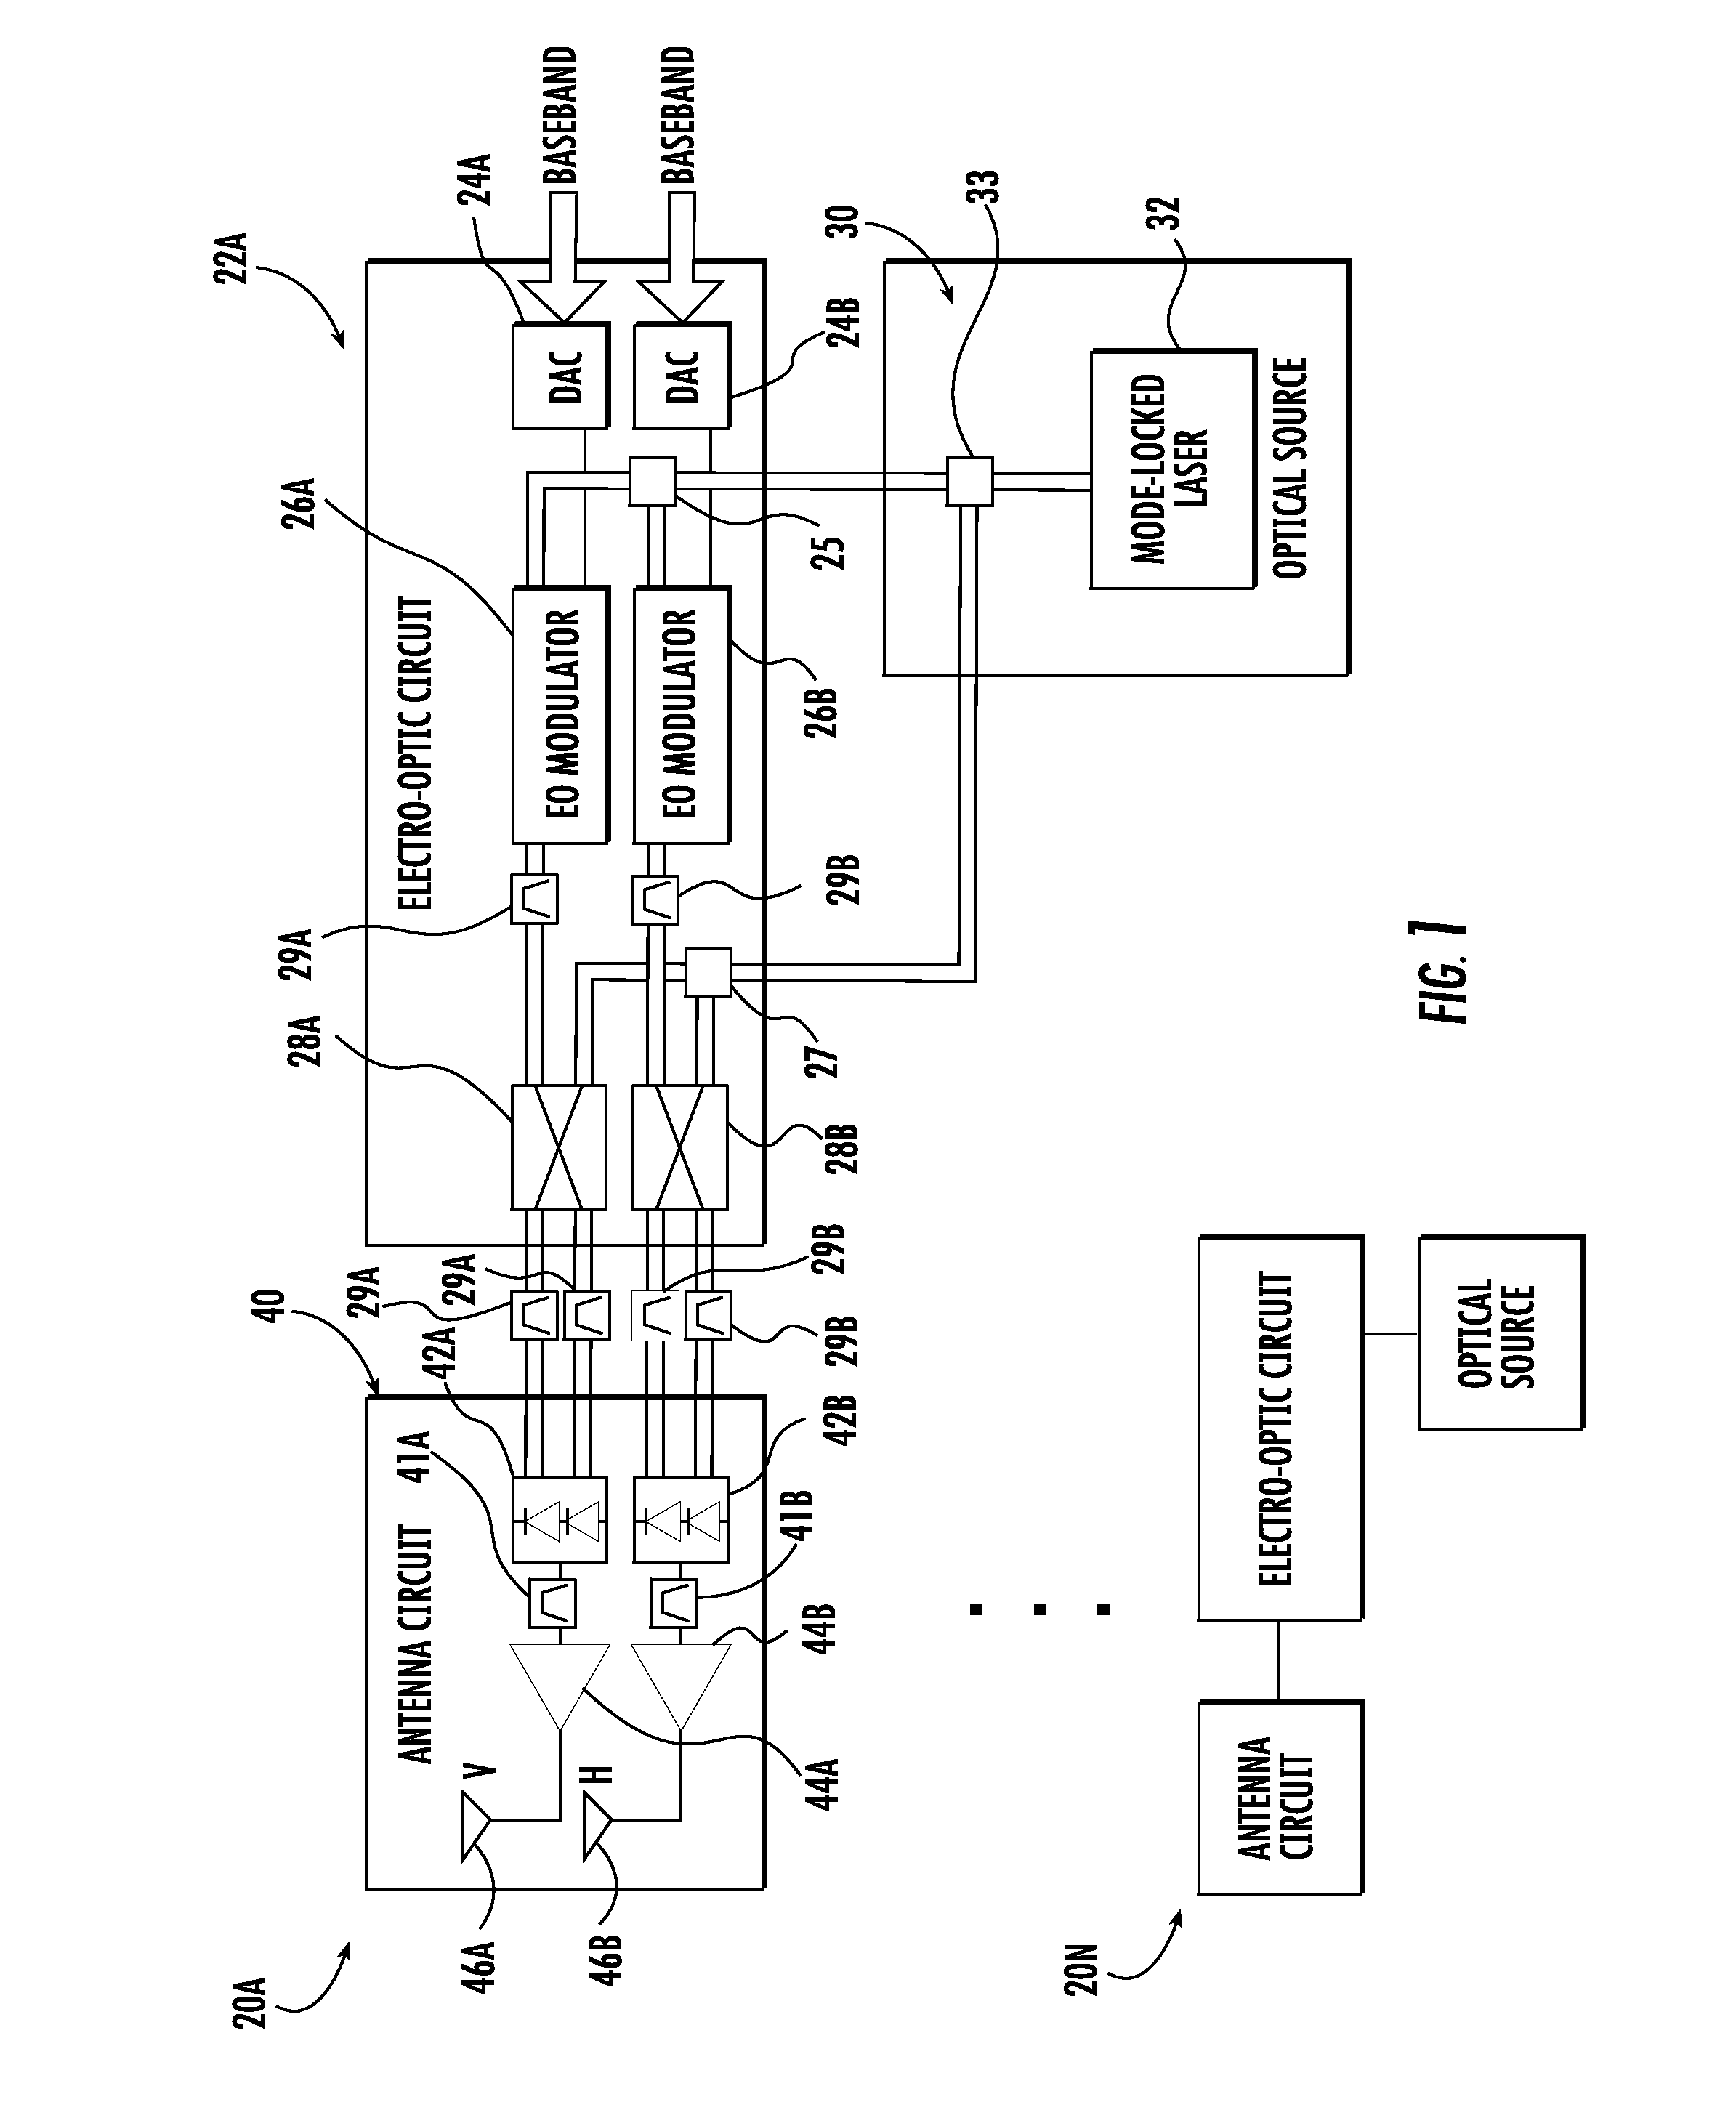 Phased antenna array including a plurality of electro-optical circuits having an optical source with an opto-electronic oscillator and associated methods